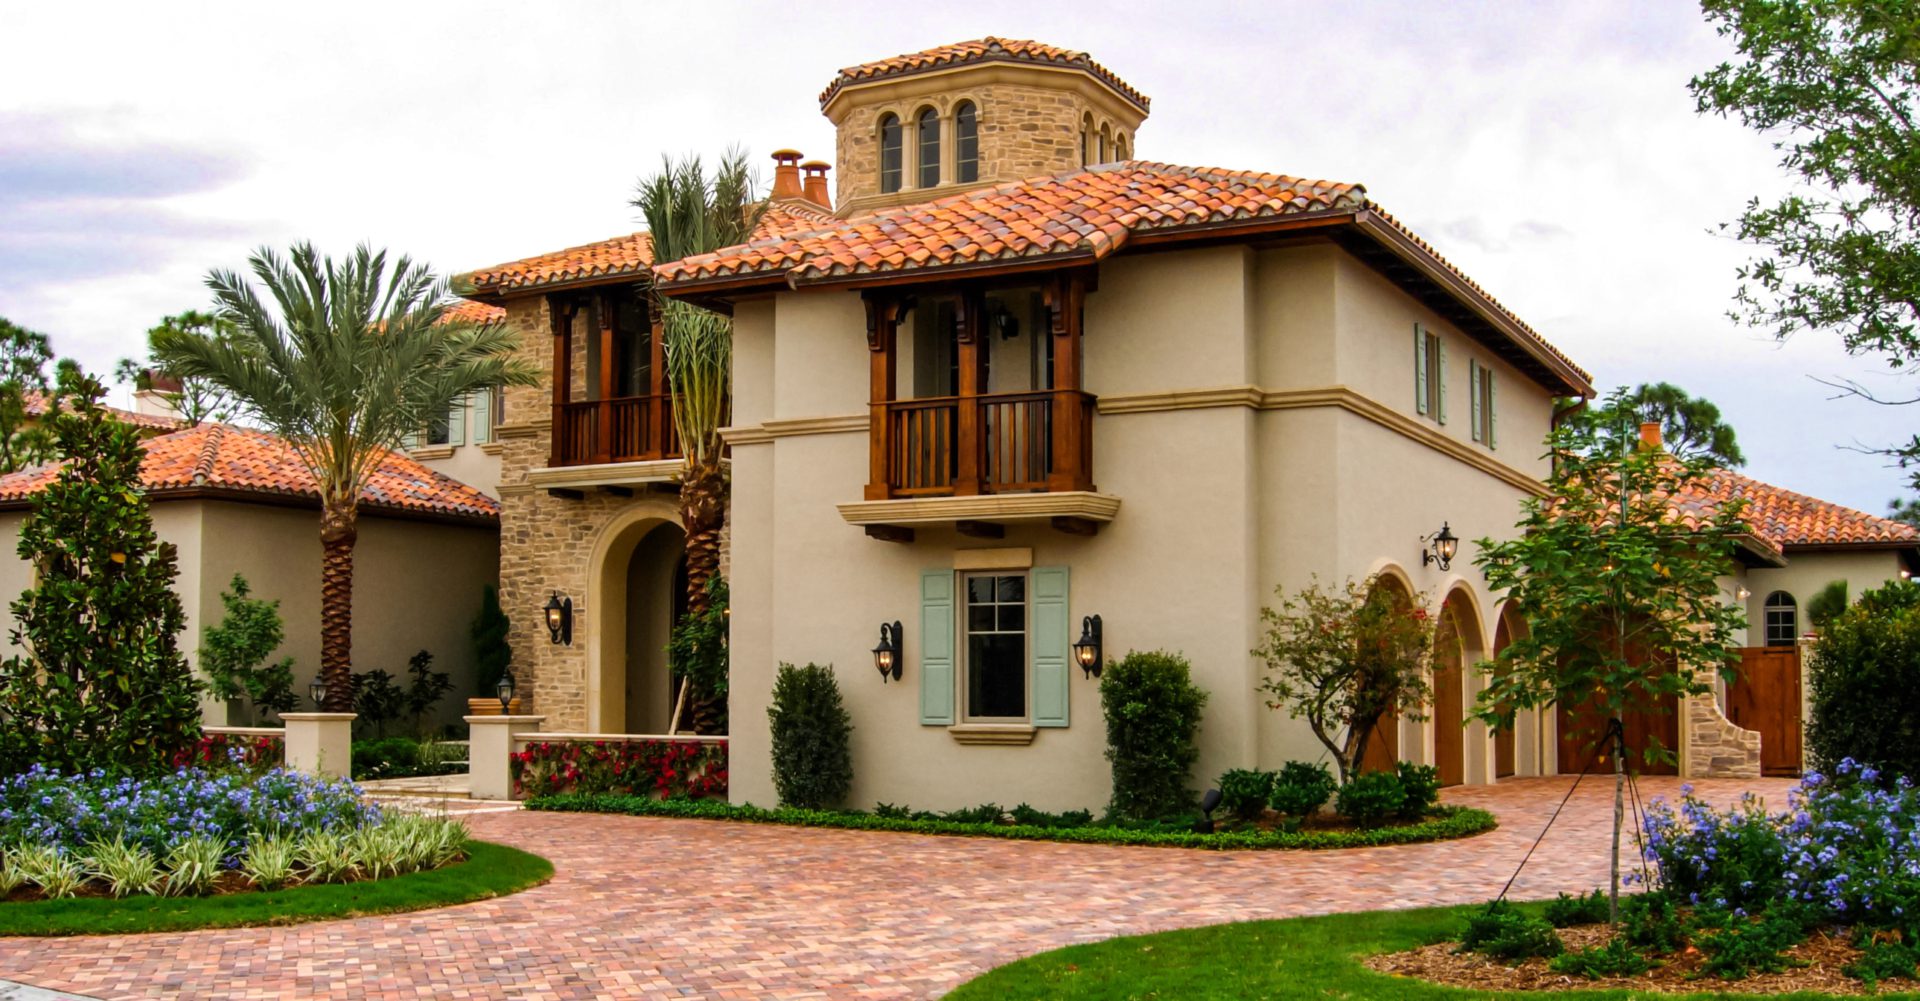 A beautiful mediterranean style home with a brick driveway.